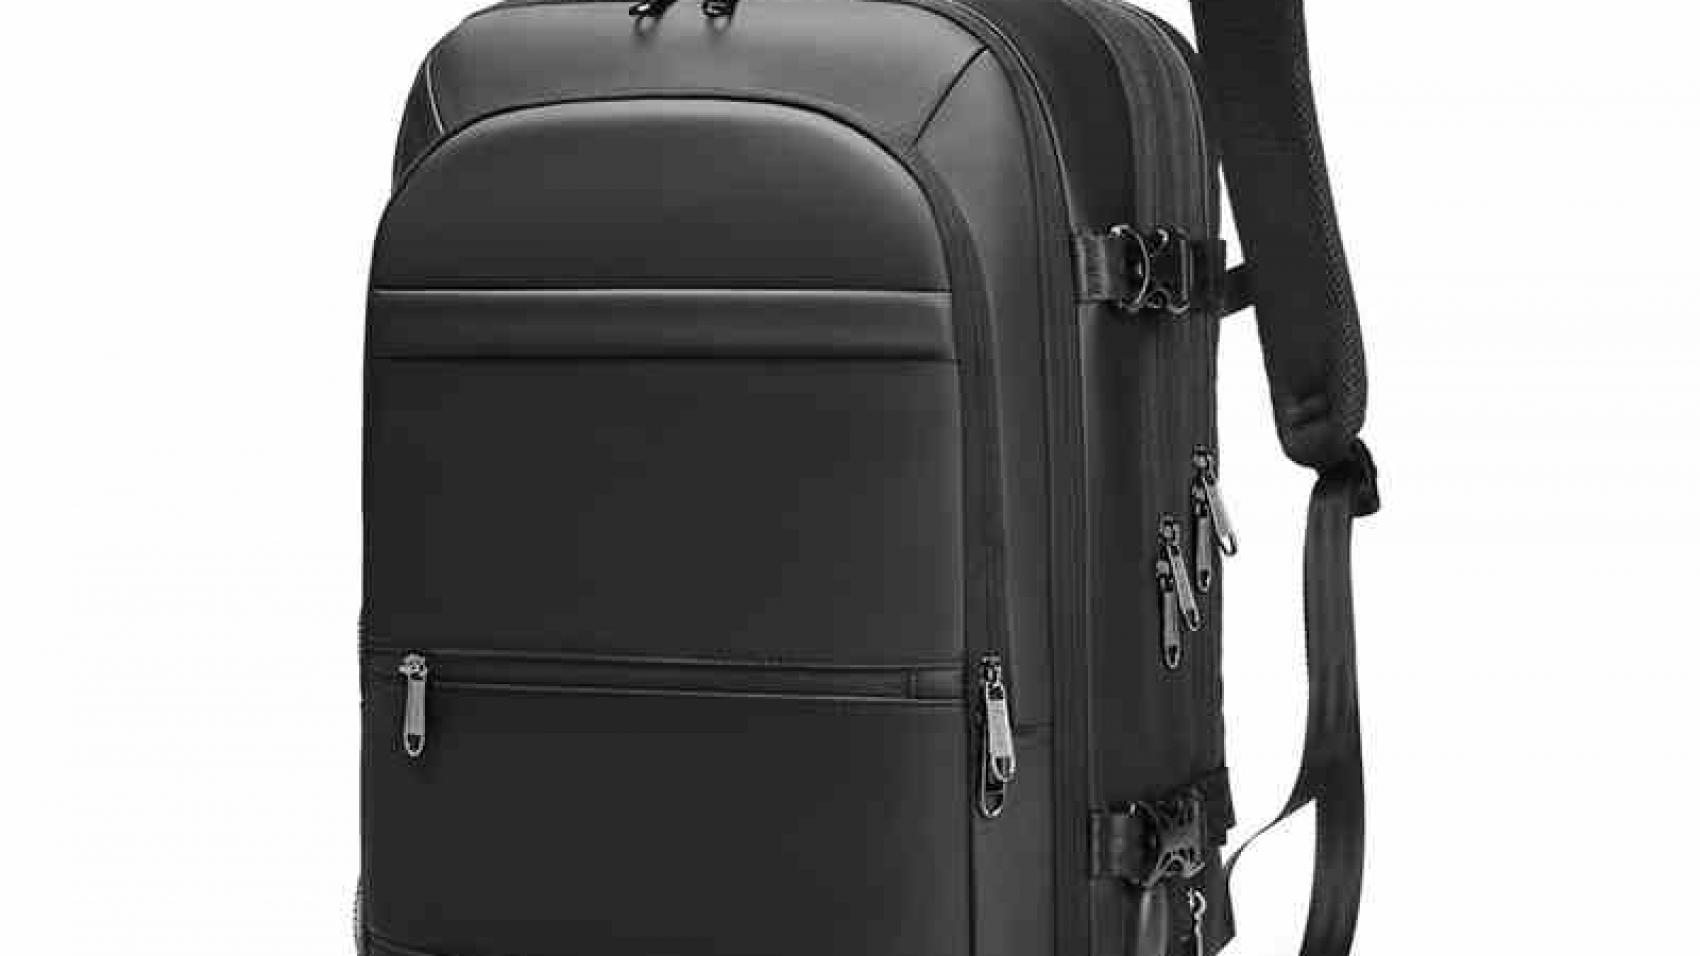 Travel Watertight Backpack with Computer Compartment